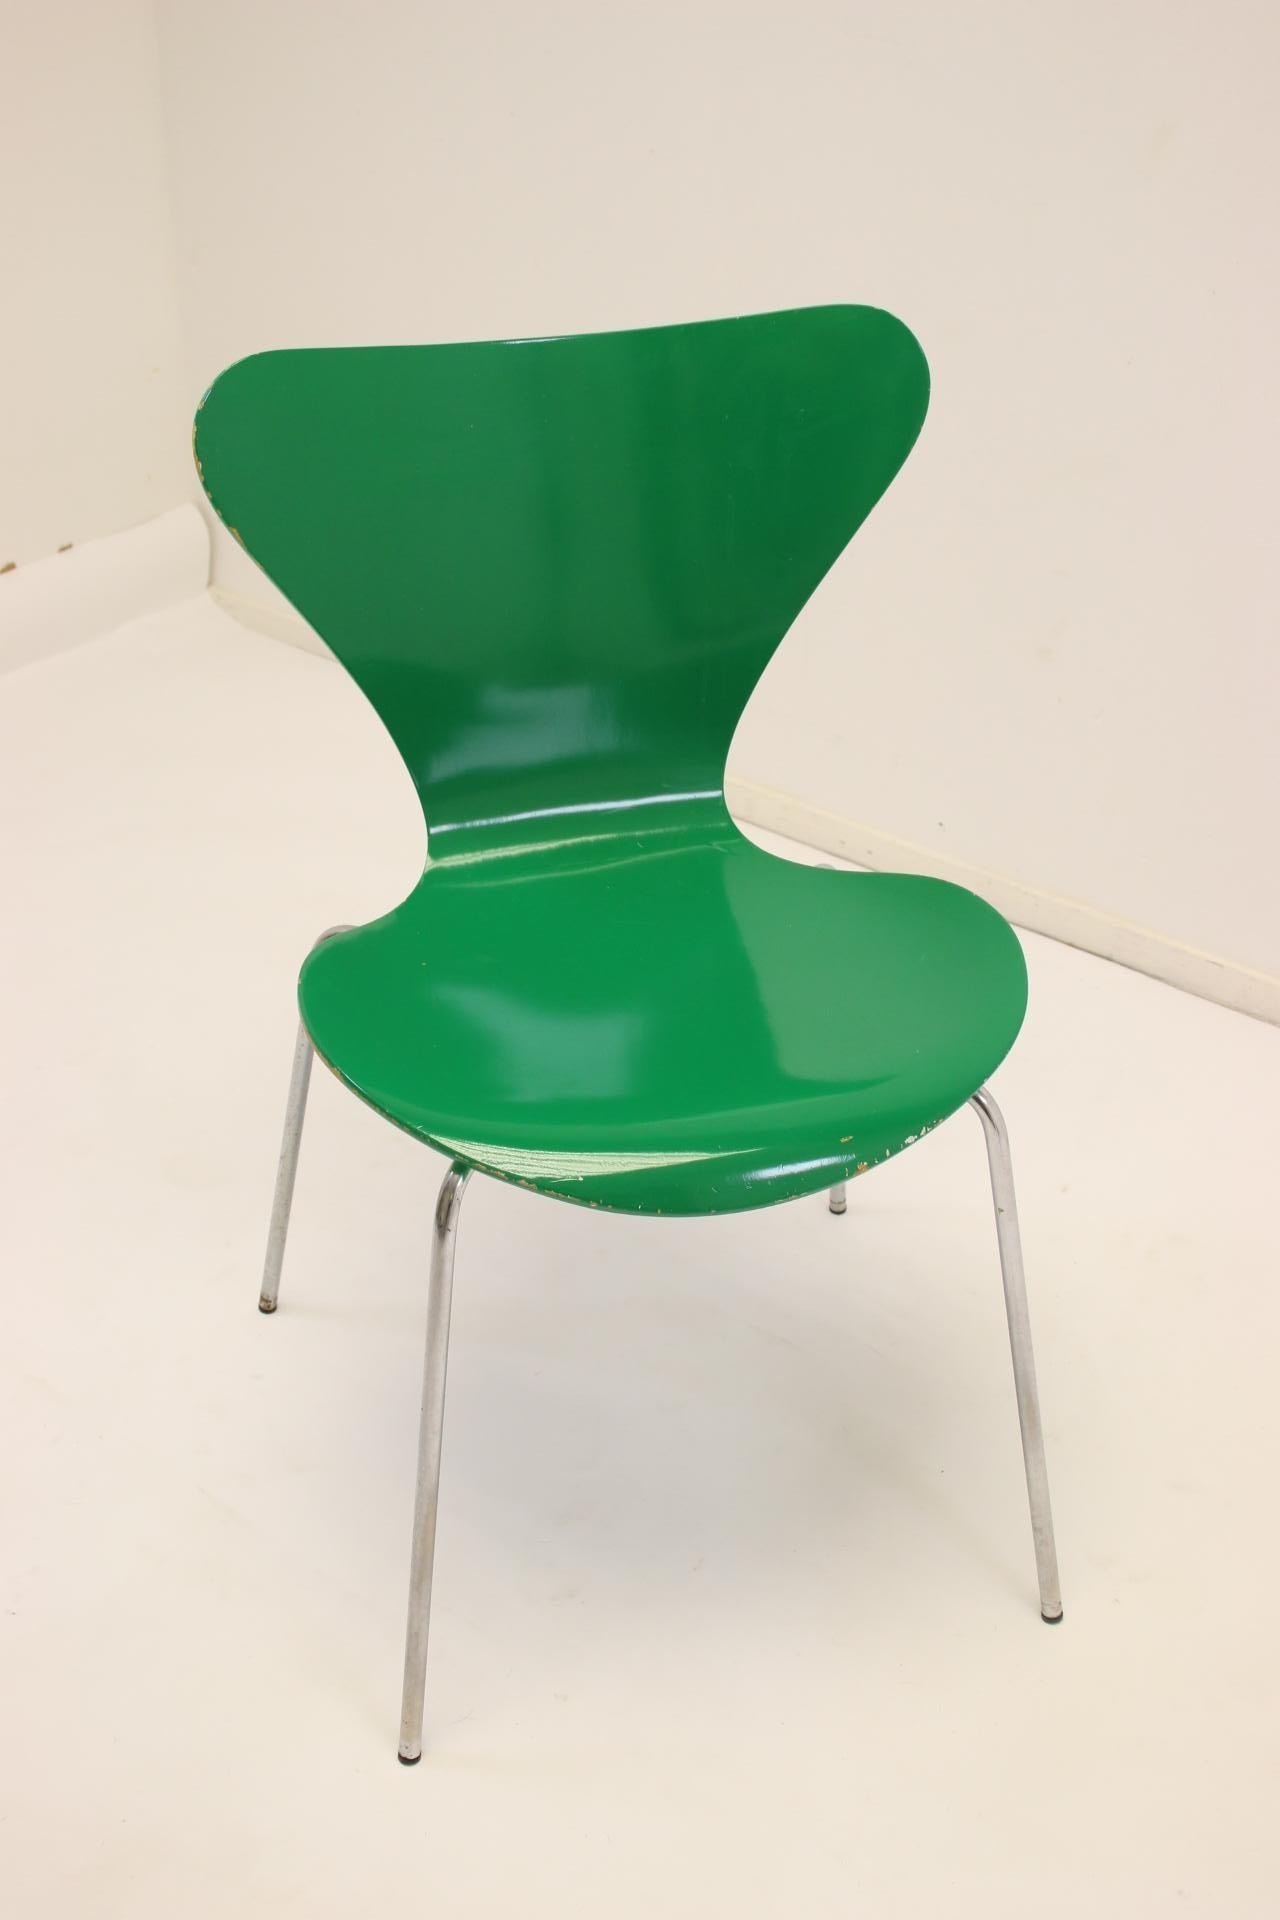 Model 3107 dining table chair green by Arne Jacobsen 1979


The butterfly chair 3107, a design by Arne Jacobsen from 1953 and also called 'Series 7', is one of the most successful chairs ever. This design by Arne Jacobsen for the Danish